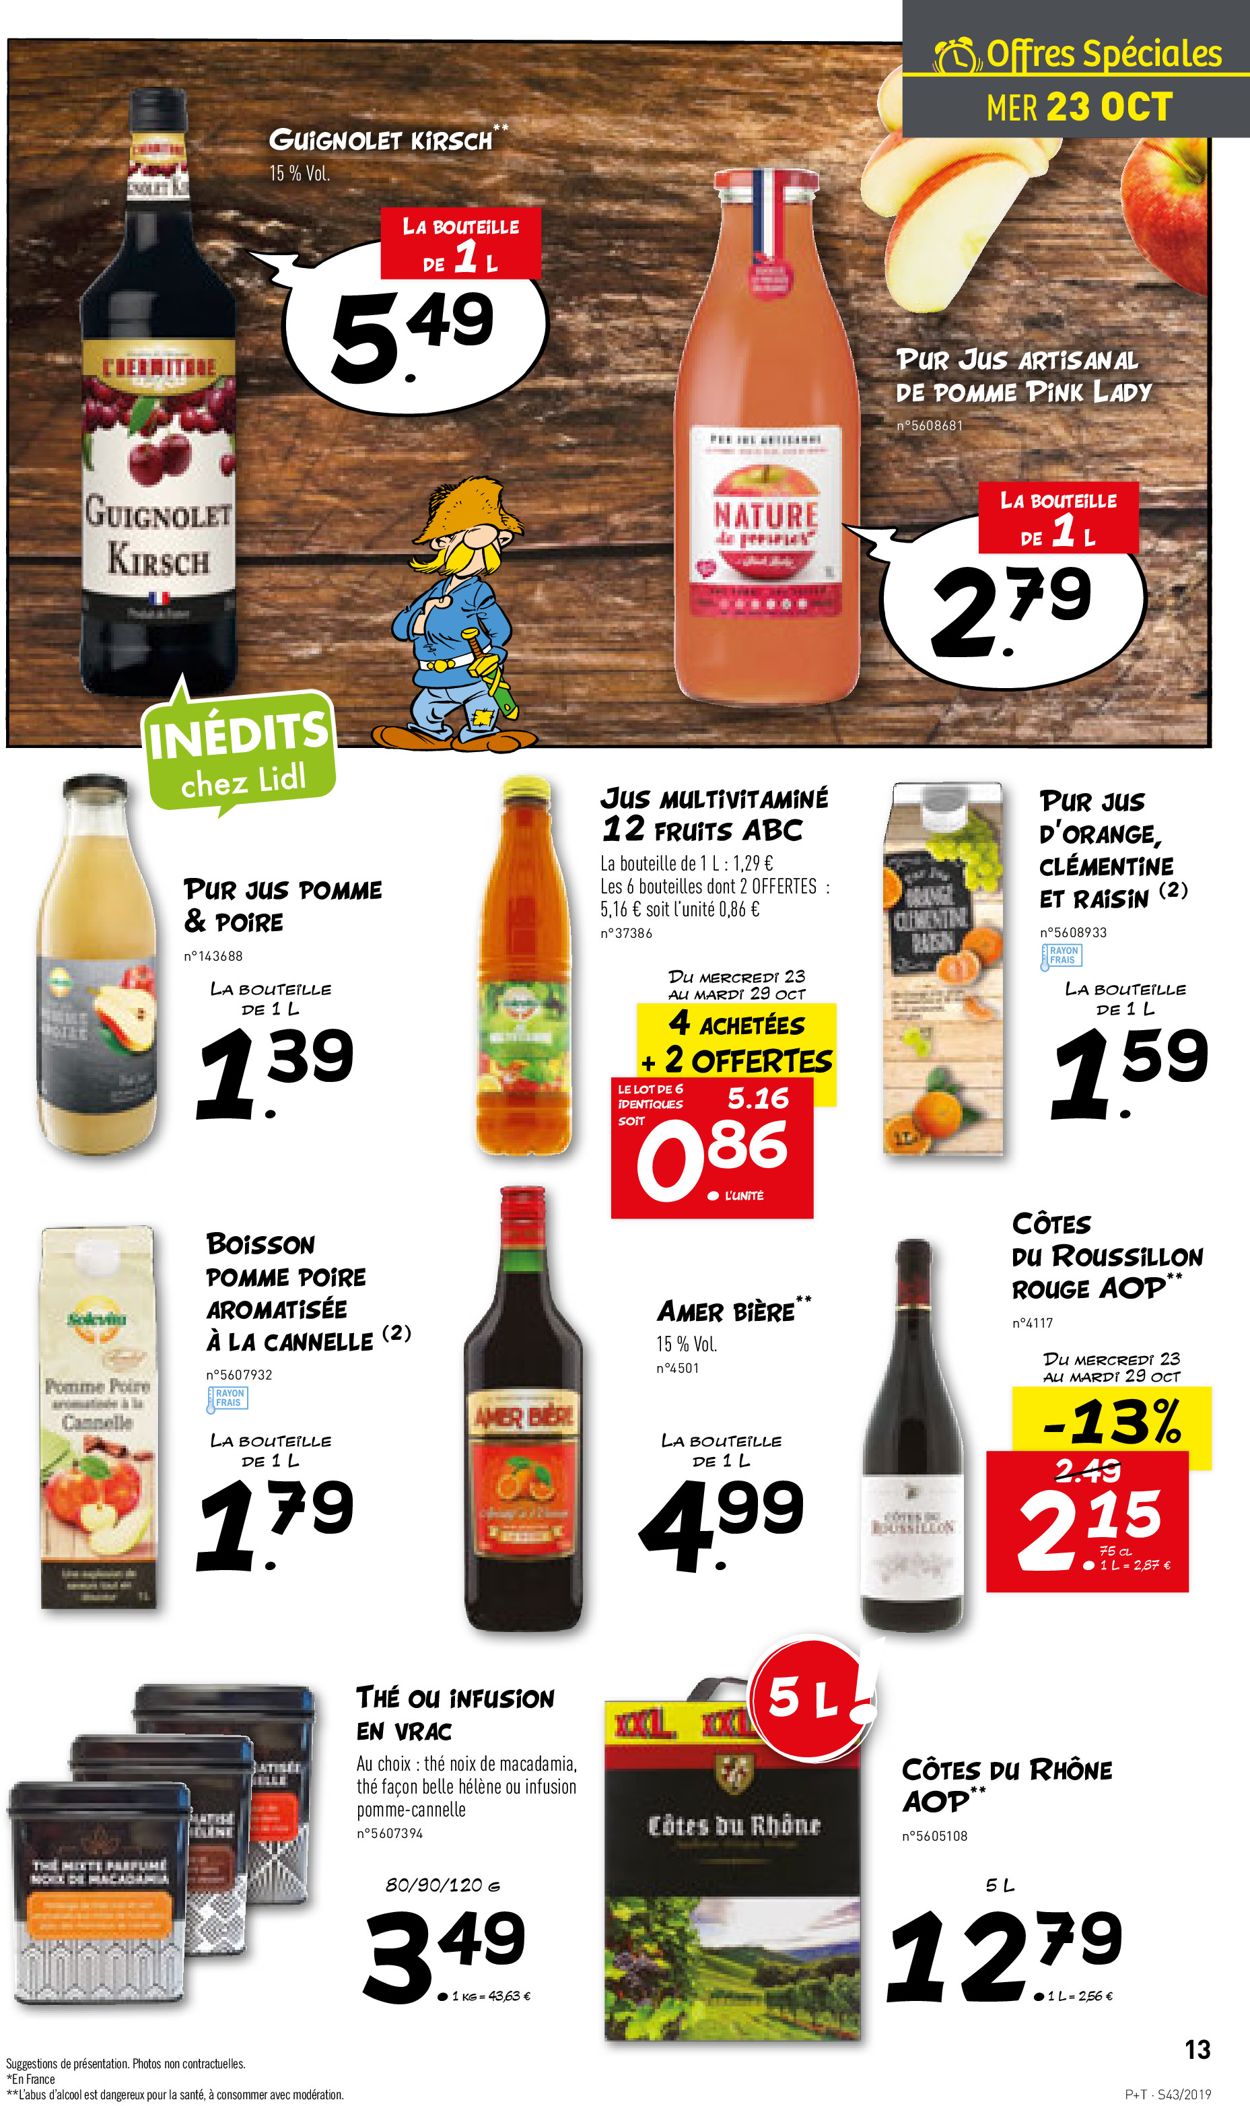 Lidl Catalogue - 23.10-29.10.2019 (Page 13)